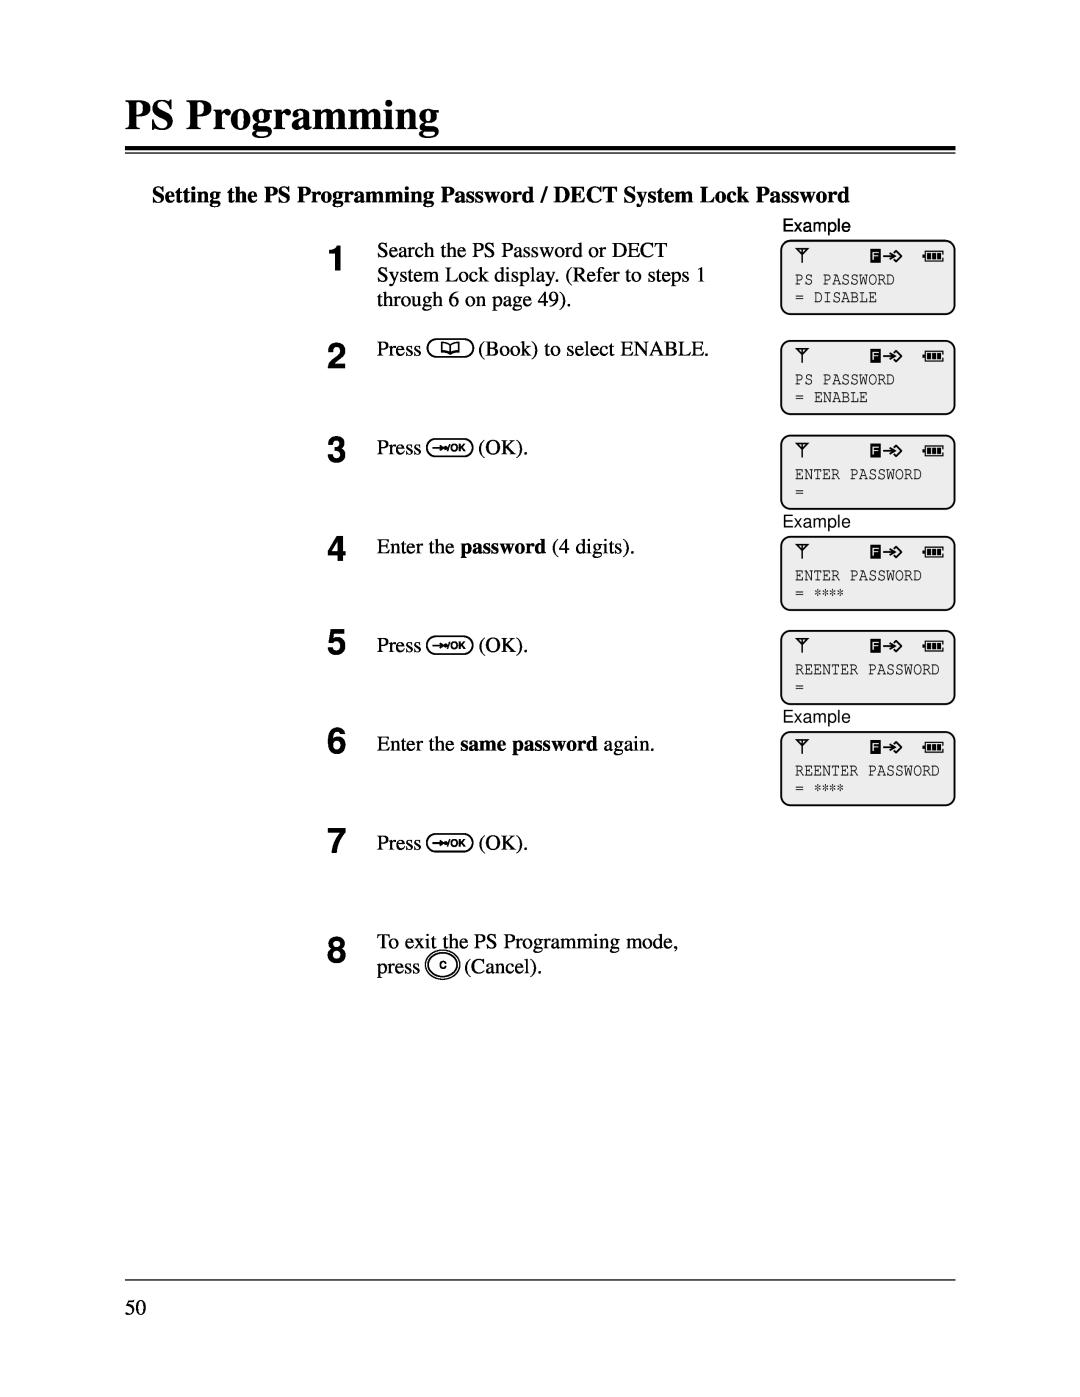 Panasonic KX-TD1232CE, KX-TD816CE user manual PS Programming, Search the PS Password or DECT 